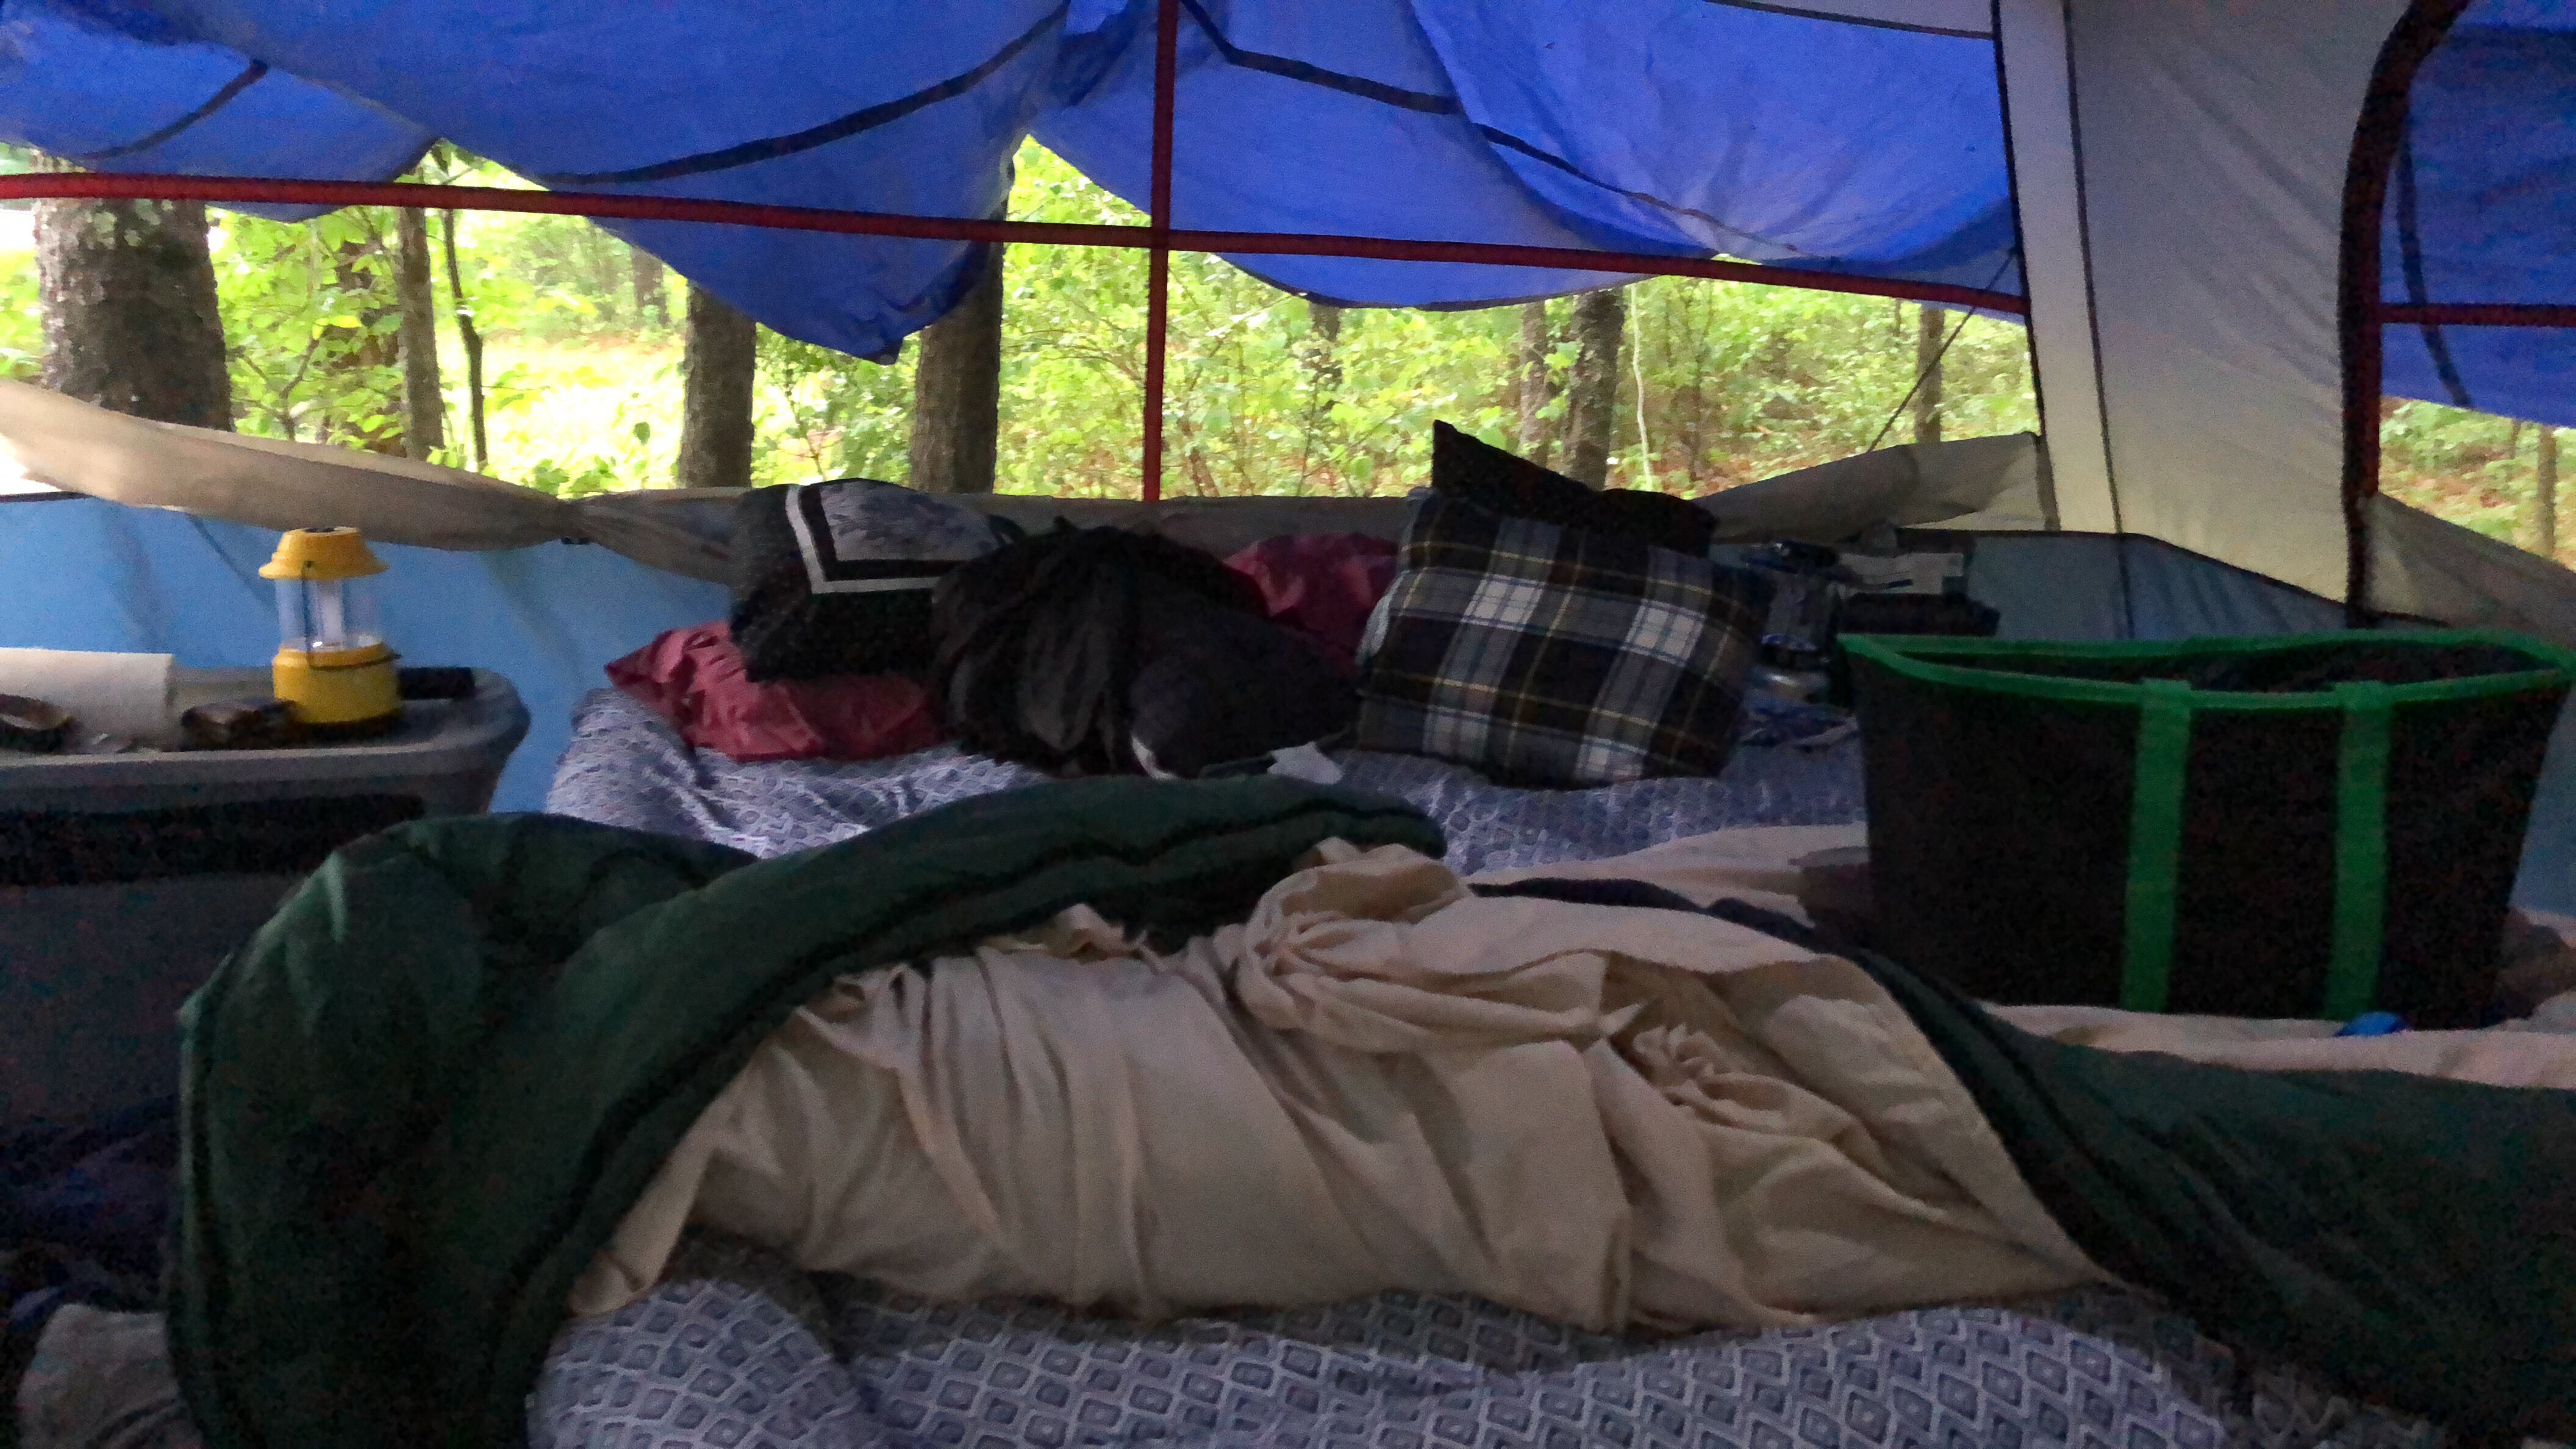 We used a family sized tent for just the two of us... 